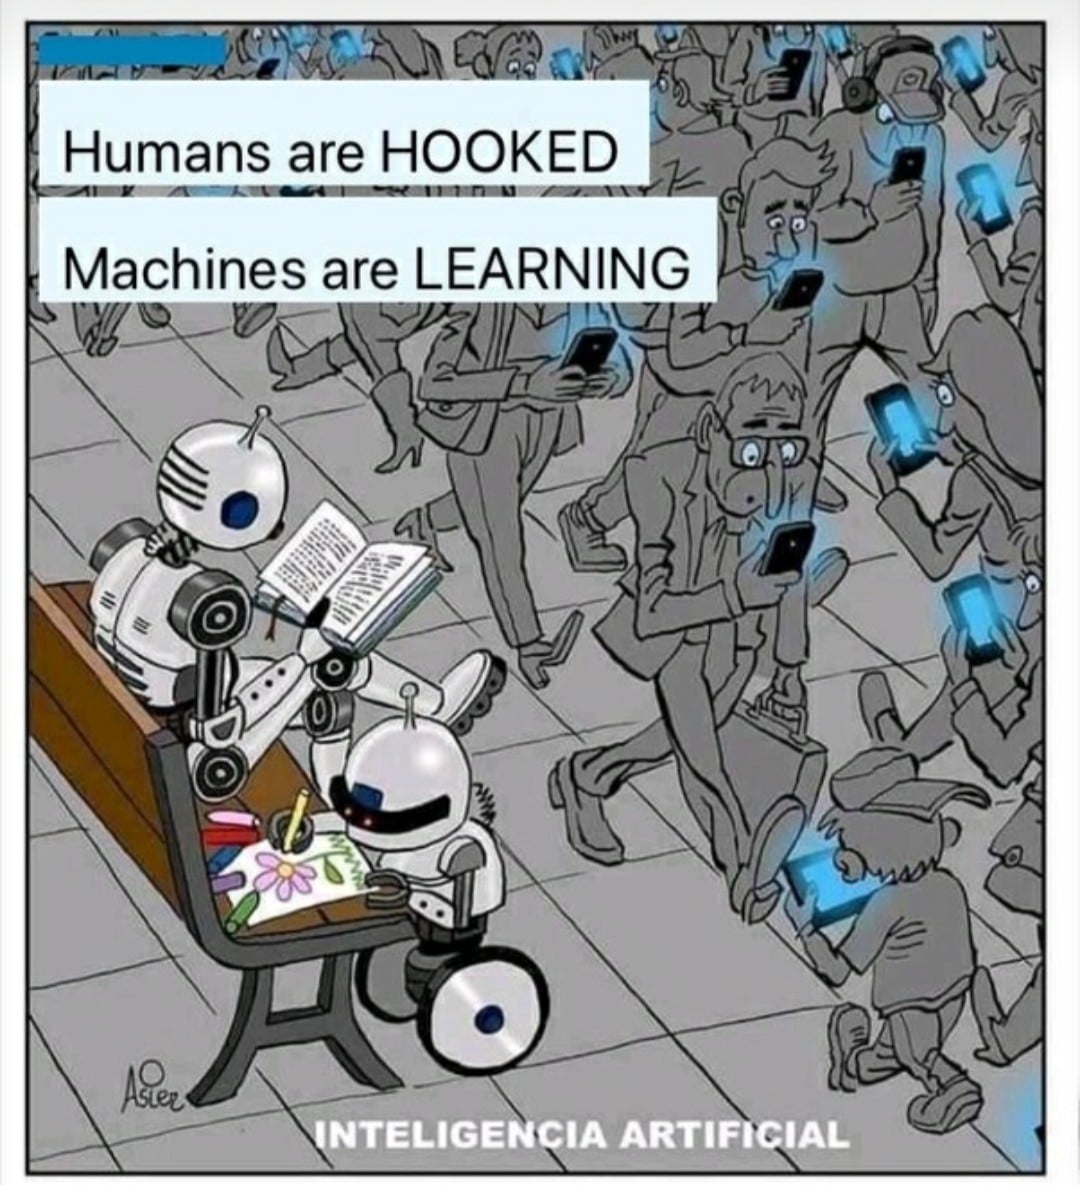 political political-memes political text: Humans are HOOKED Machines are LEARNING NTELIGENCIA ARTIFICIAL 